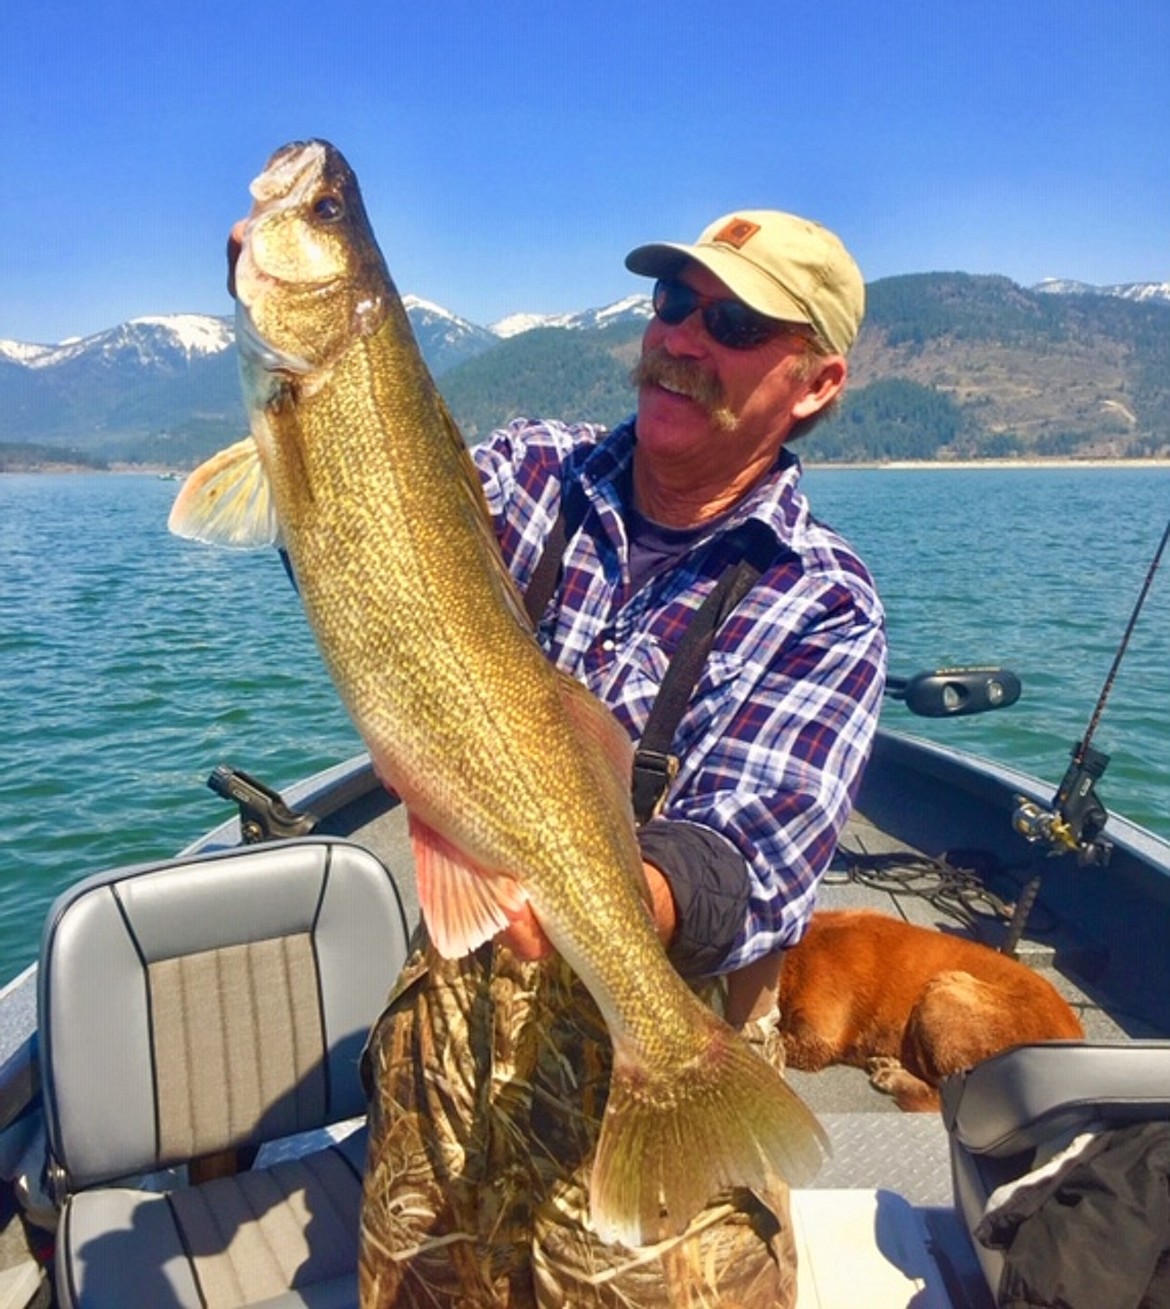 Fishing Guide Rich Lindsey hoists a 10-pound Lake Pend Oreille walleye caught in 2018. An angler incentive program pays anglers to harvest the fish in addition to efforts by the Hickey Brothers, a commercial net fishing operation based out of Wisconsin,.